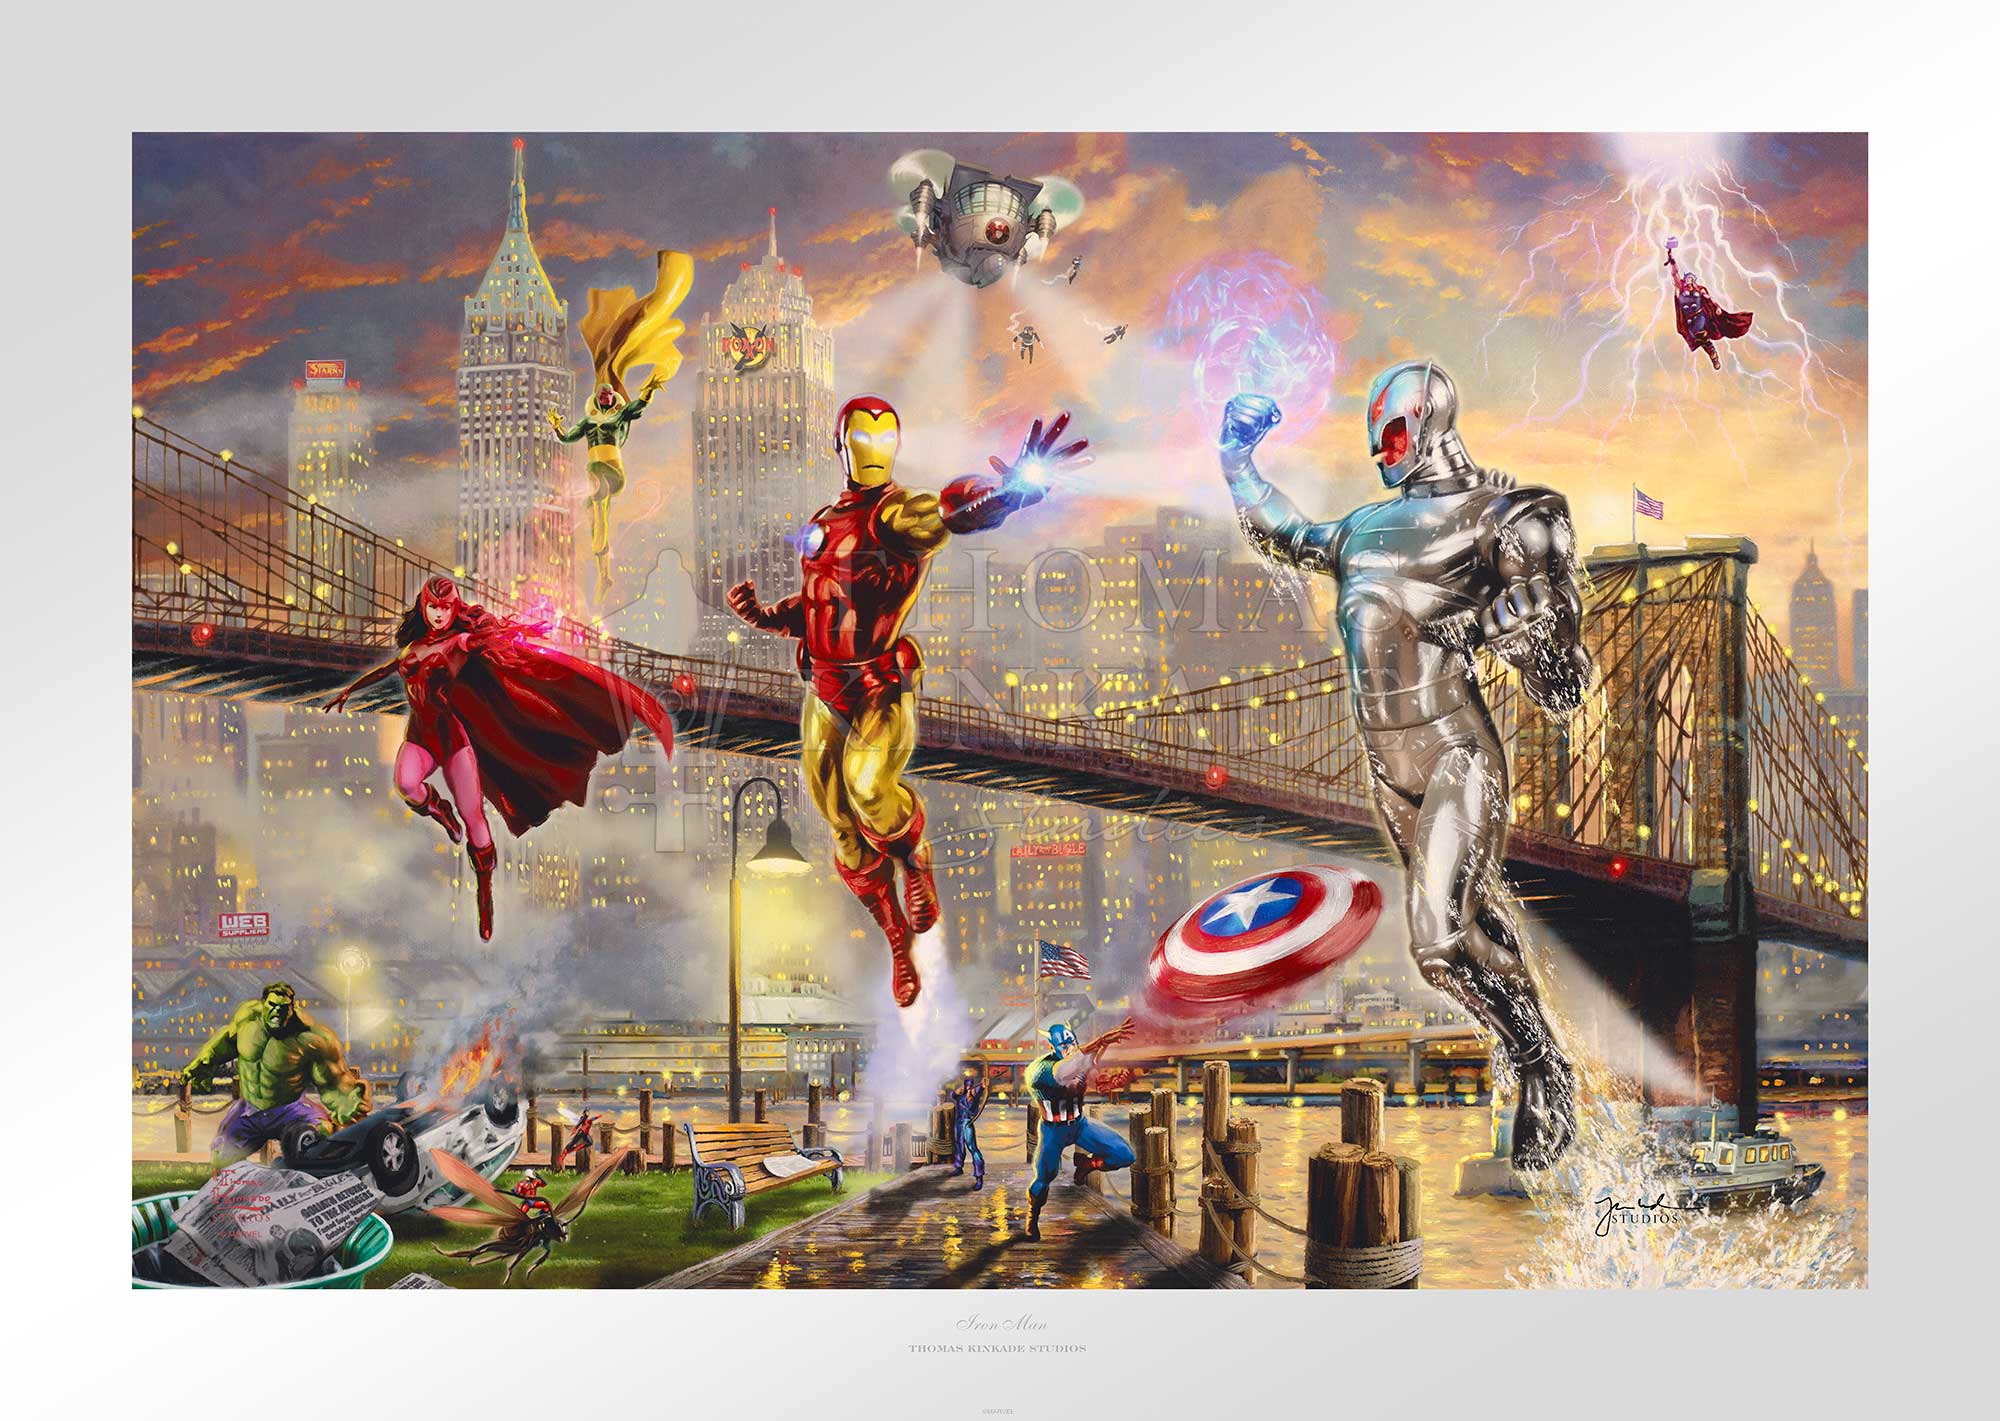 In the shadows of the New York City skyline and the Brooklyn Bridge, Hulk, Scarlet Witch, Wasp, Hawkeye, Captain America, Thor, Vision, and the Ant-Man on a flying ant are all prepared to join Iron Man in defeating Ultron. - Unframed Paper